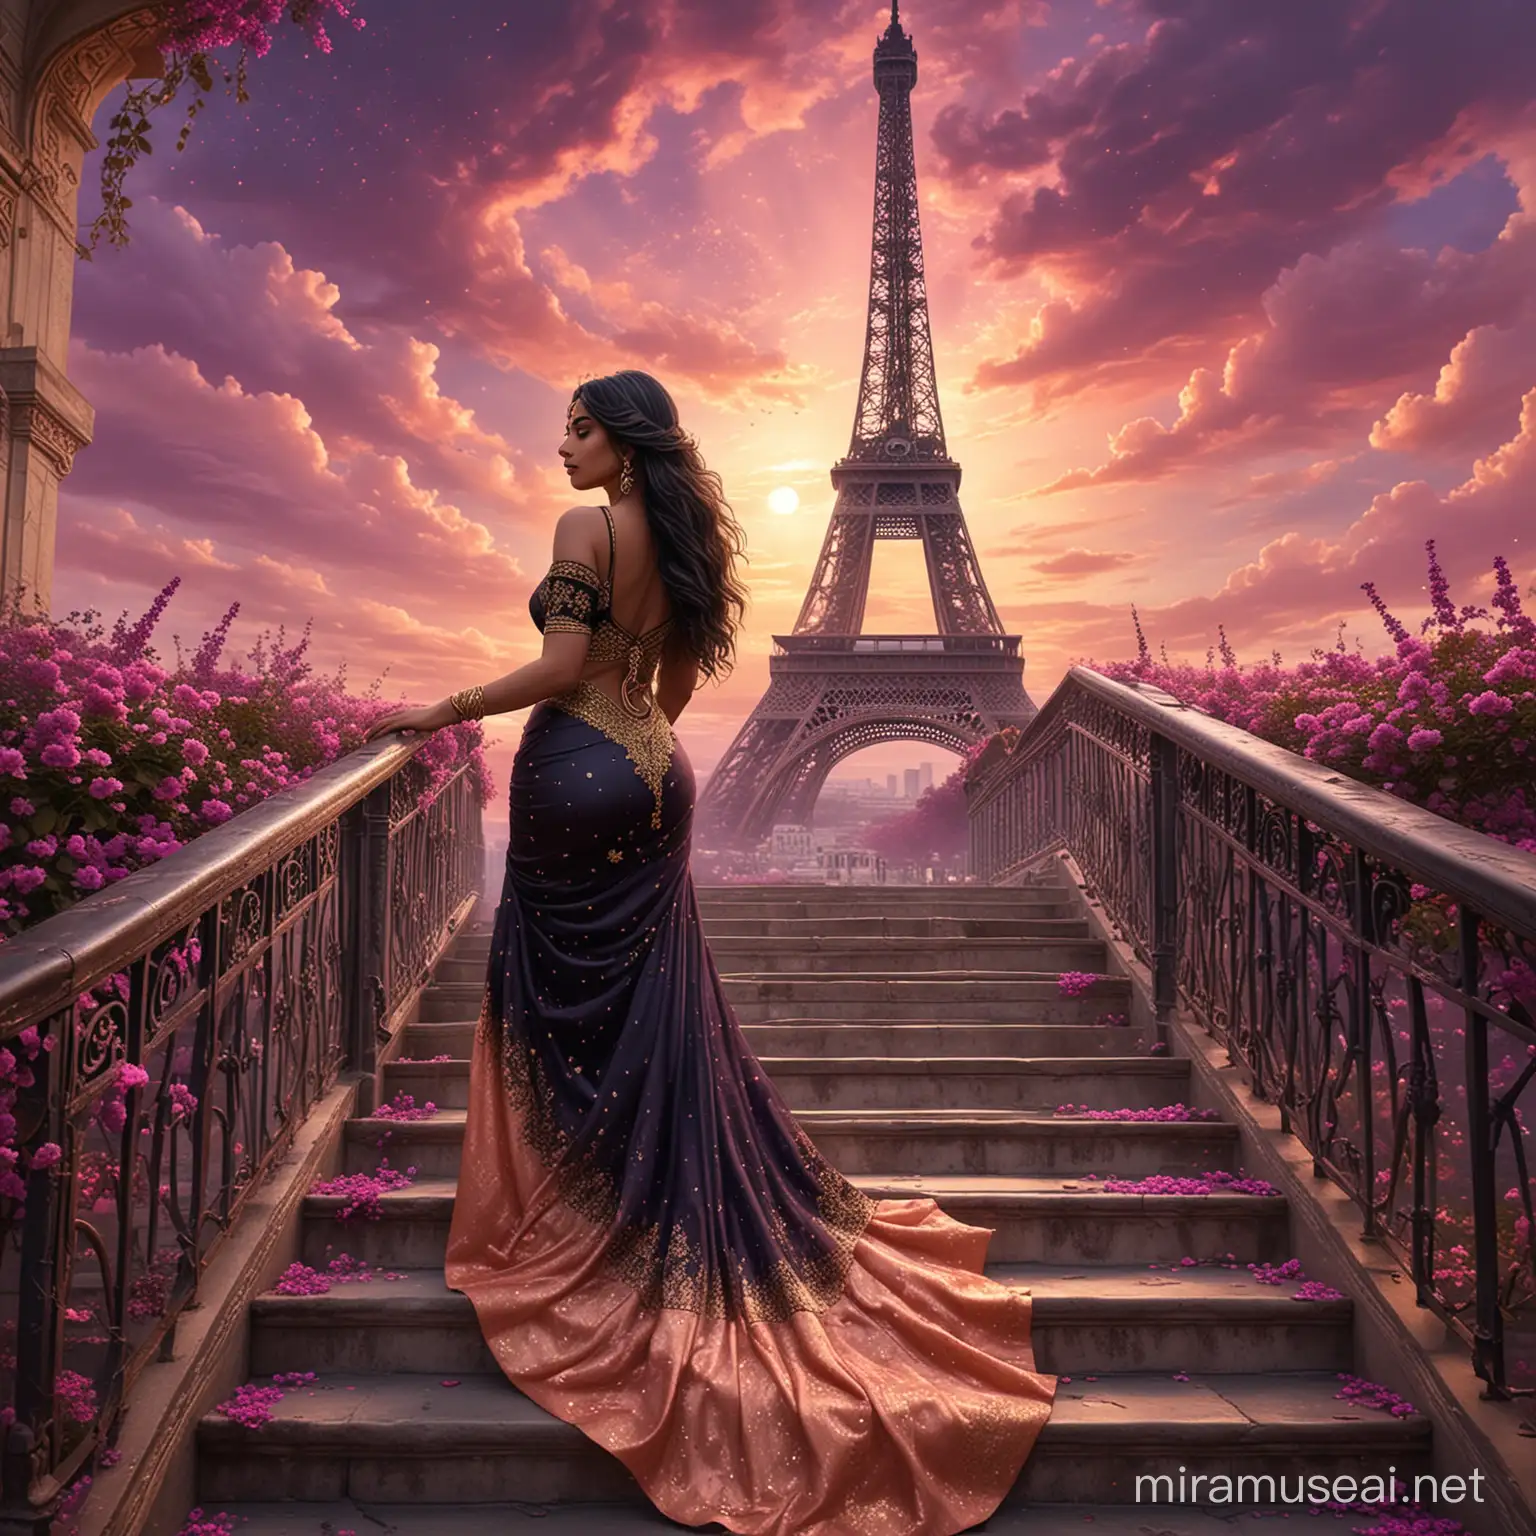 Elegant Indian Princess Ascending Staircase Amidst Golden Nebula and Eiffel Tower